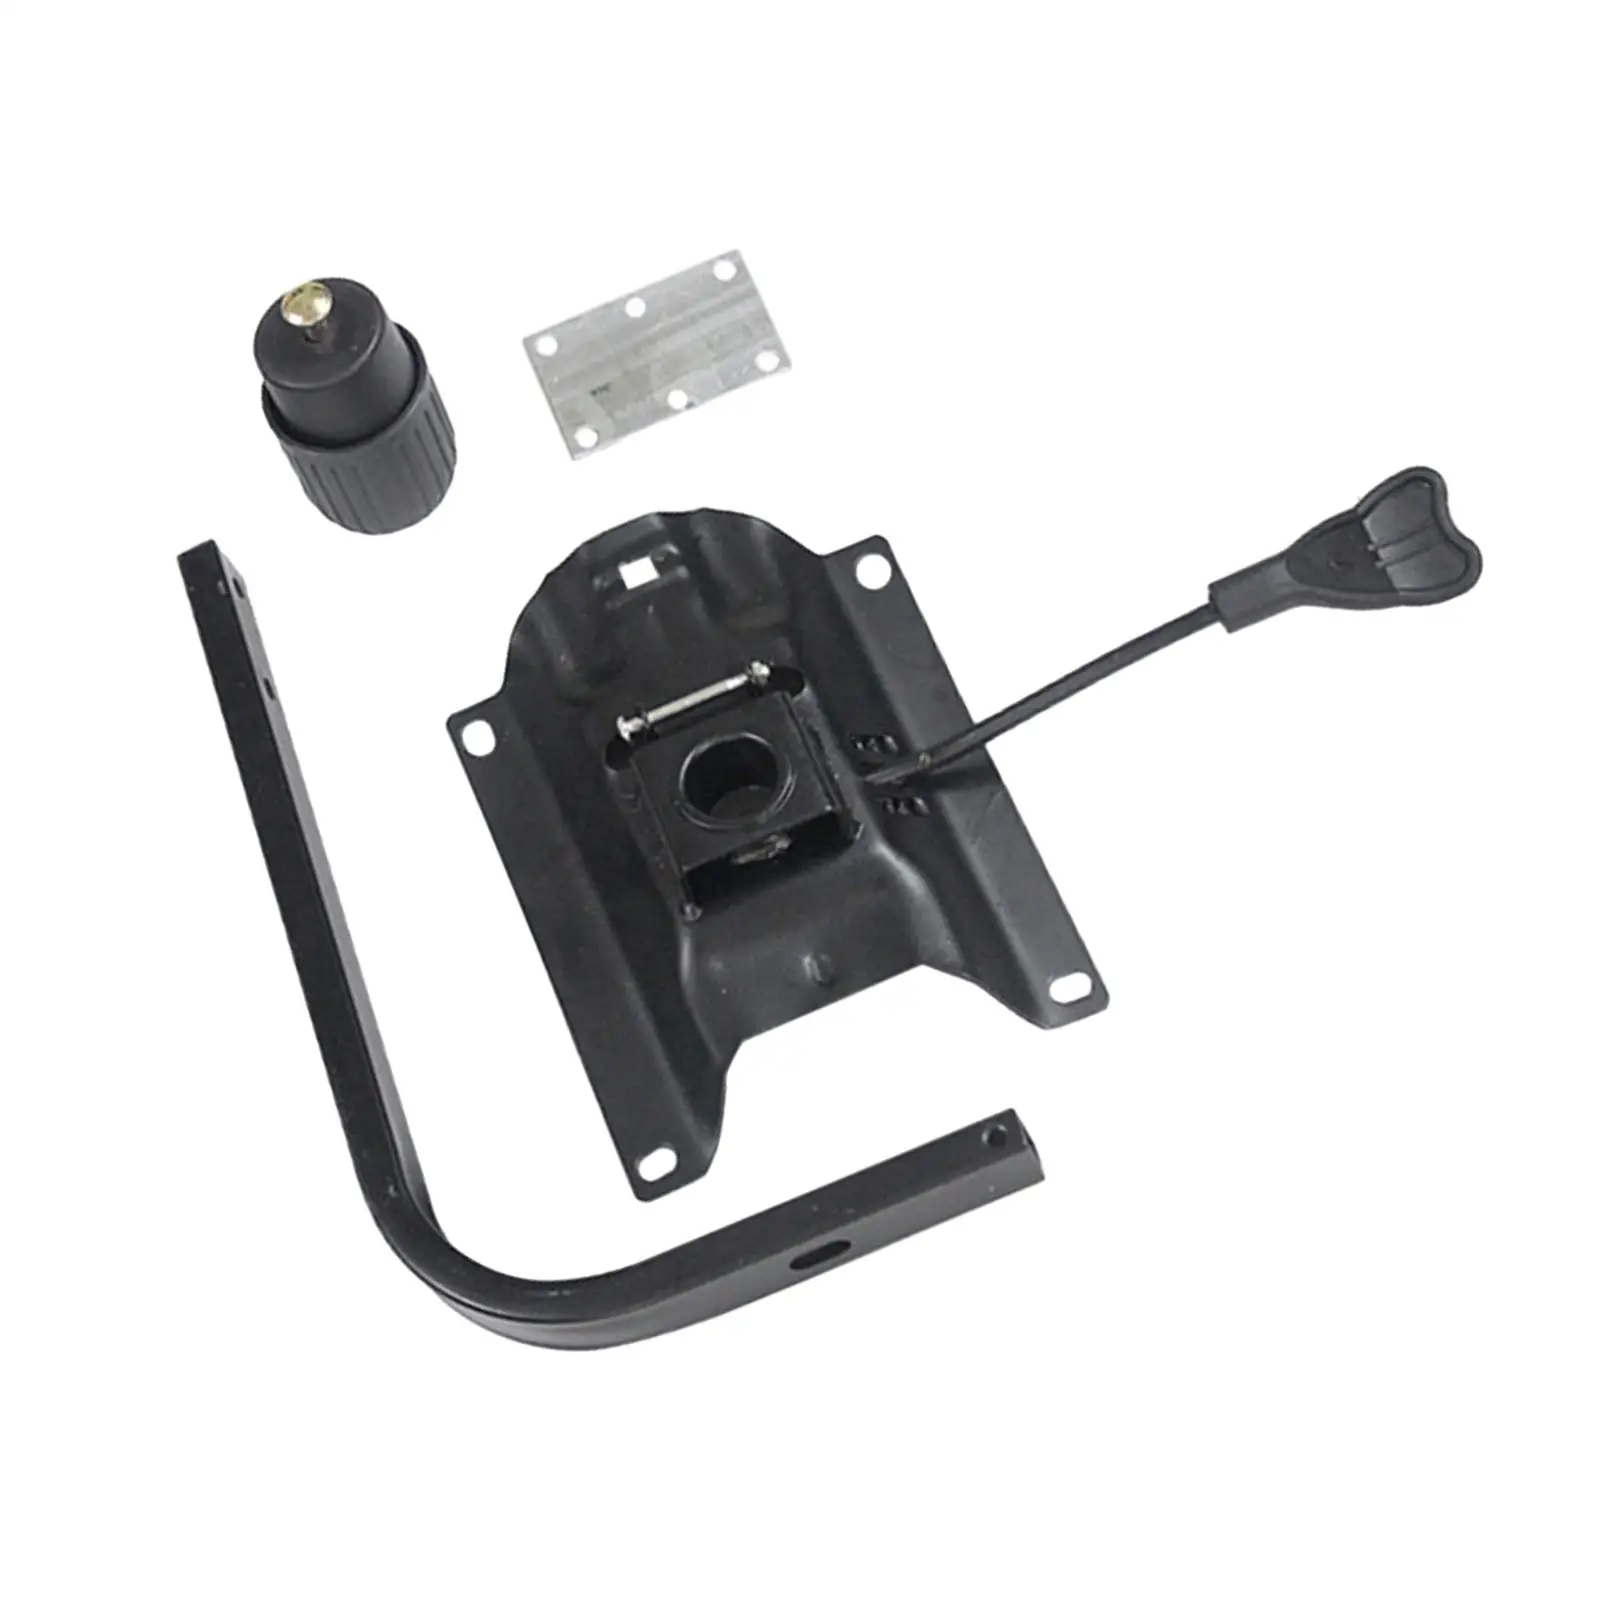 Replacement Swivel Tilt Control for Office Chair Heavy Duty Desk Chair Seat Tilt Control Chassis for Home Computer Swivel Chairs